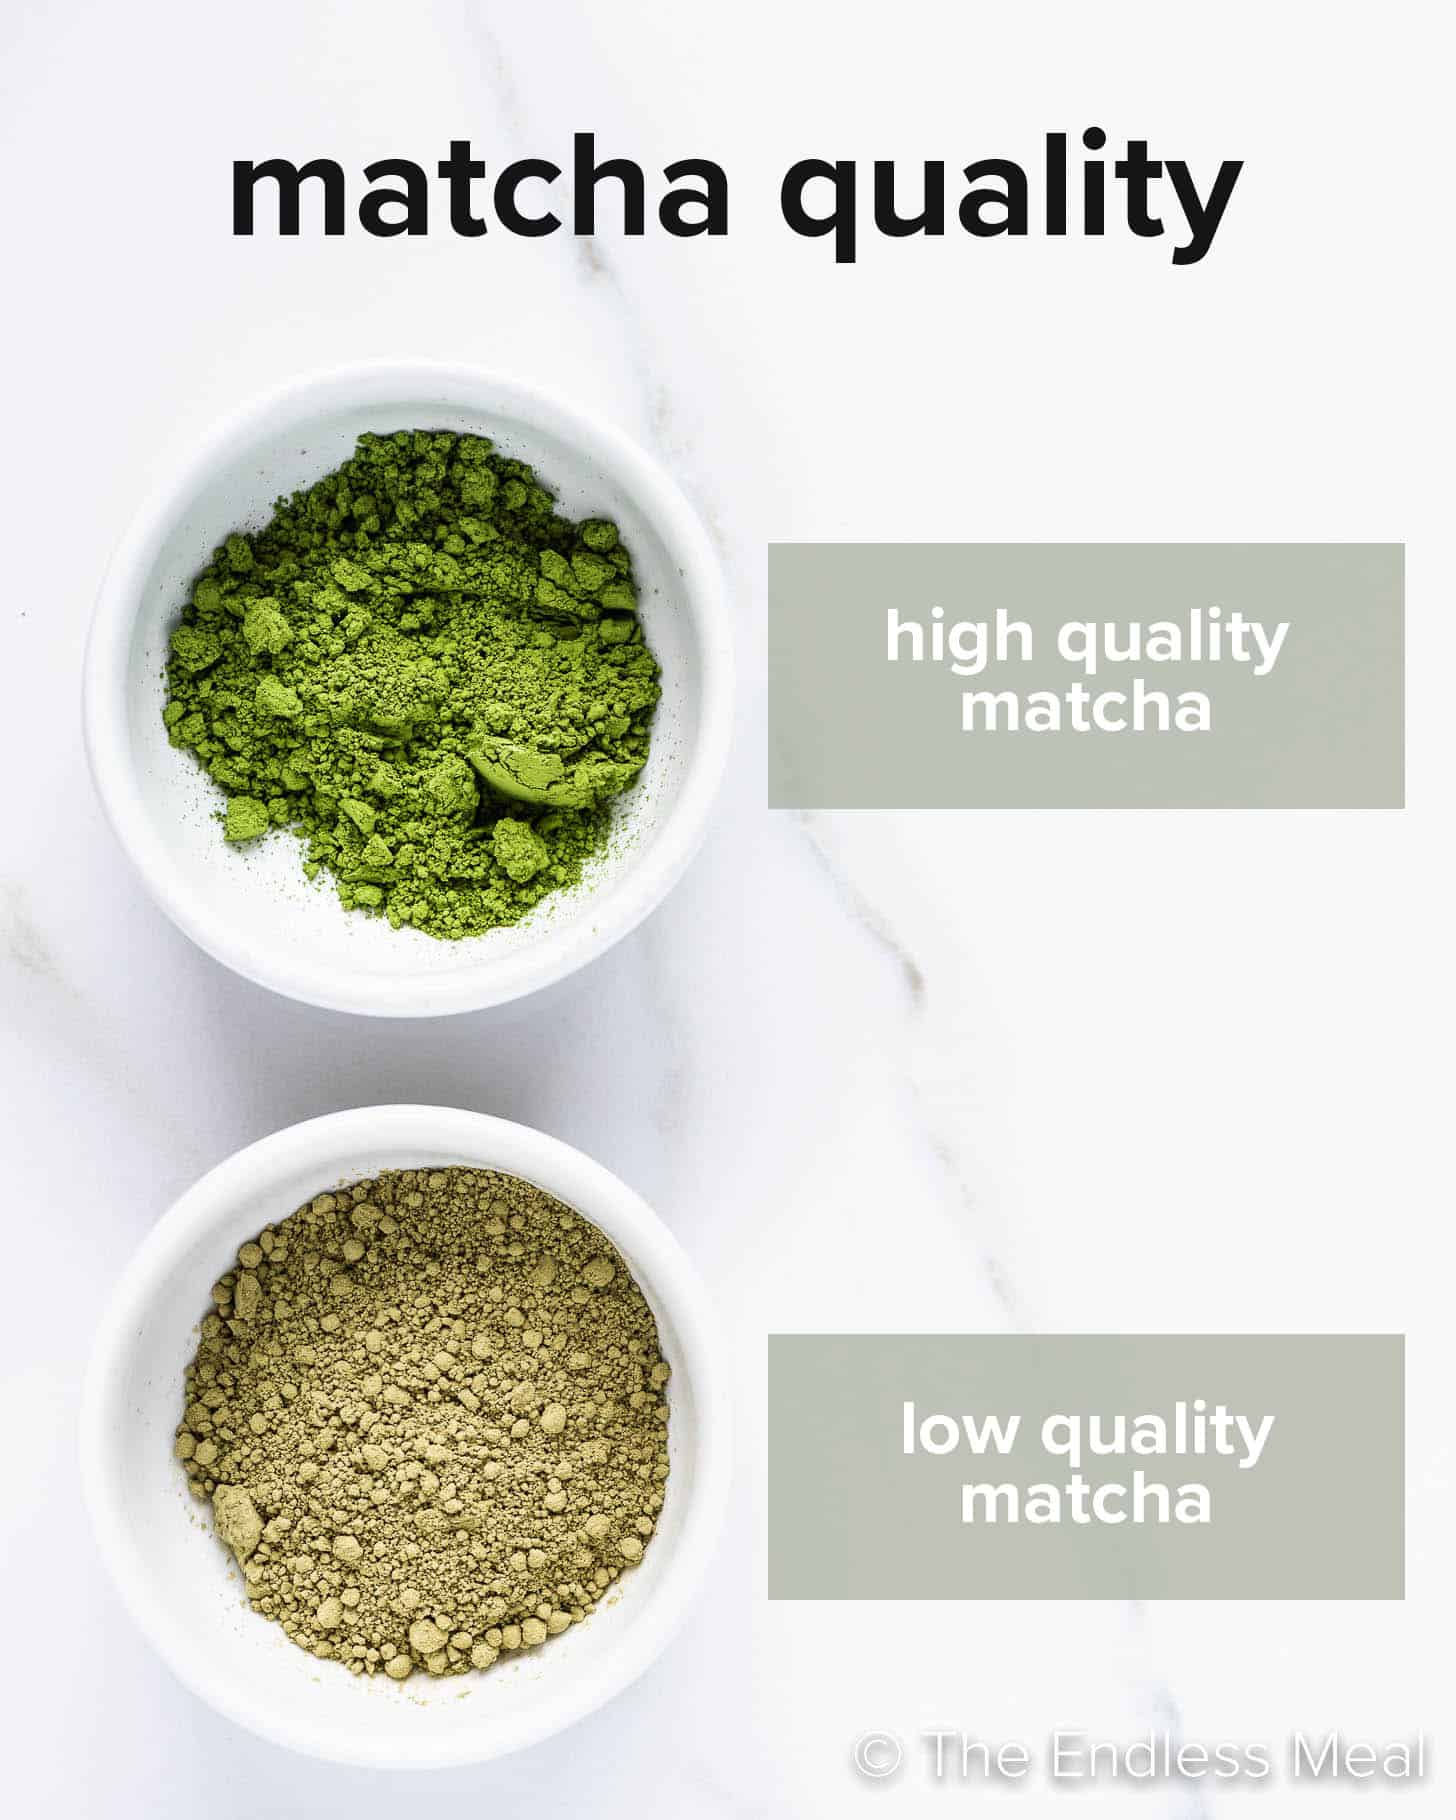 a picture showing the different quality of matcha tea